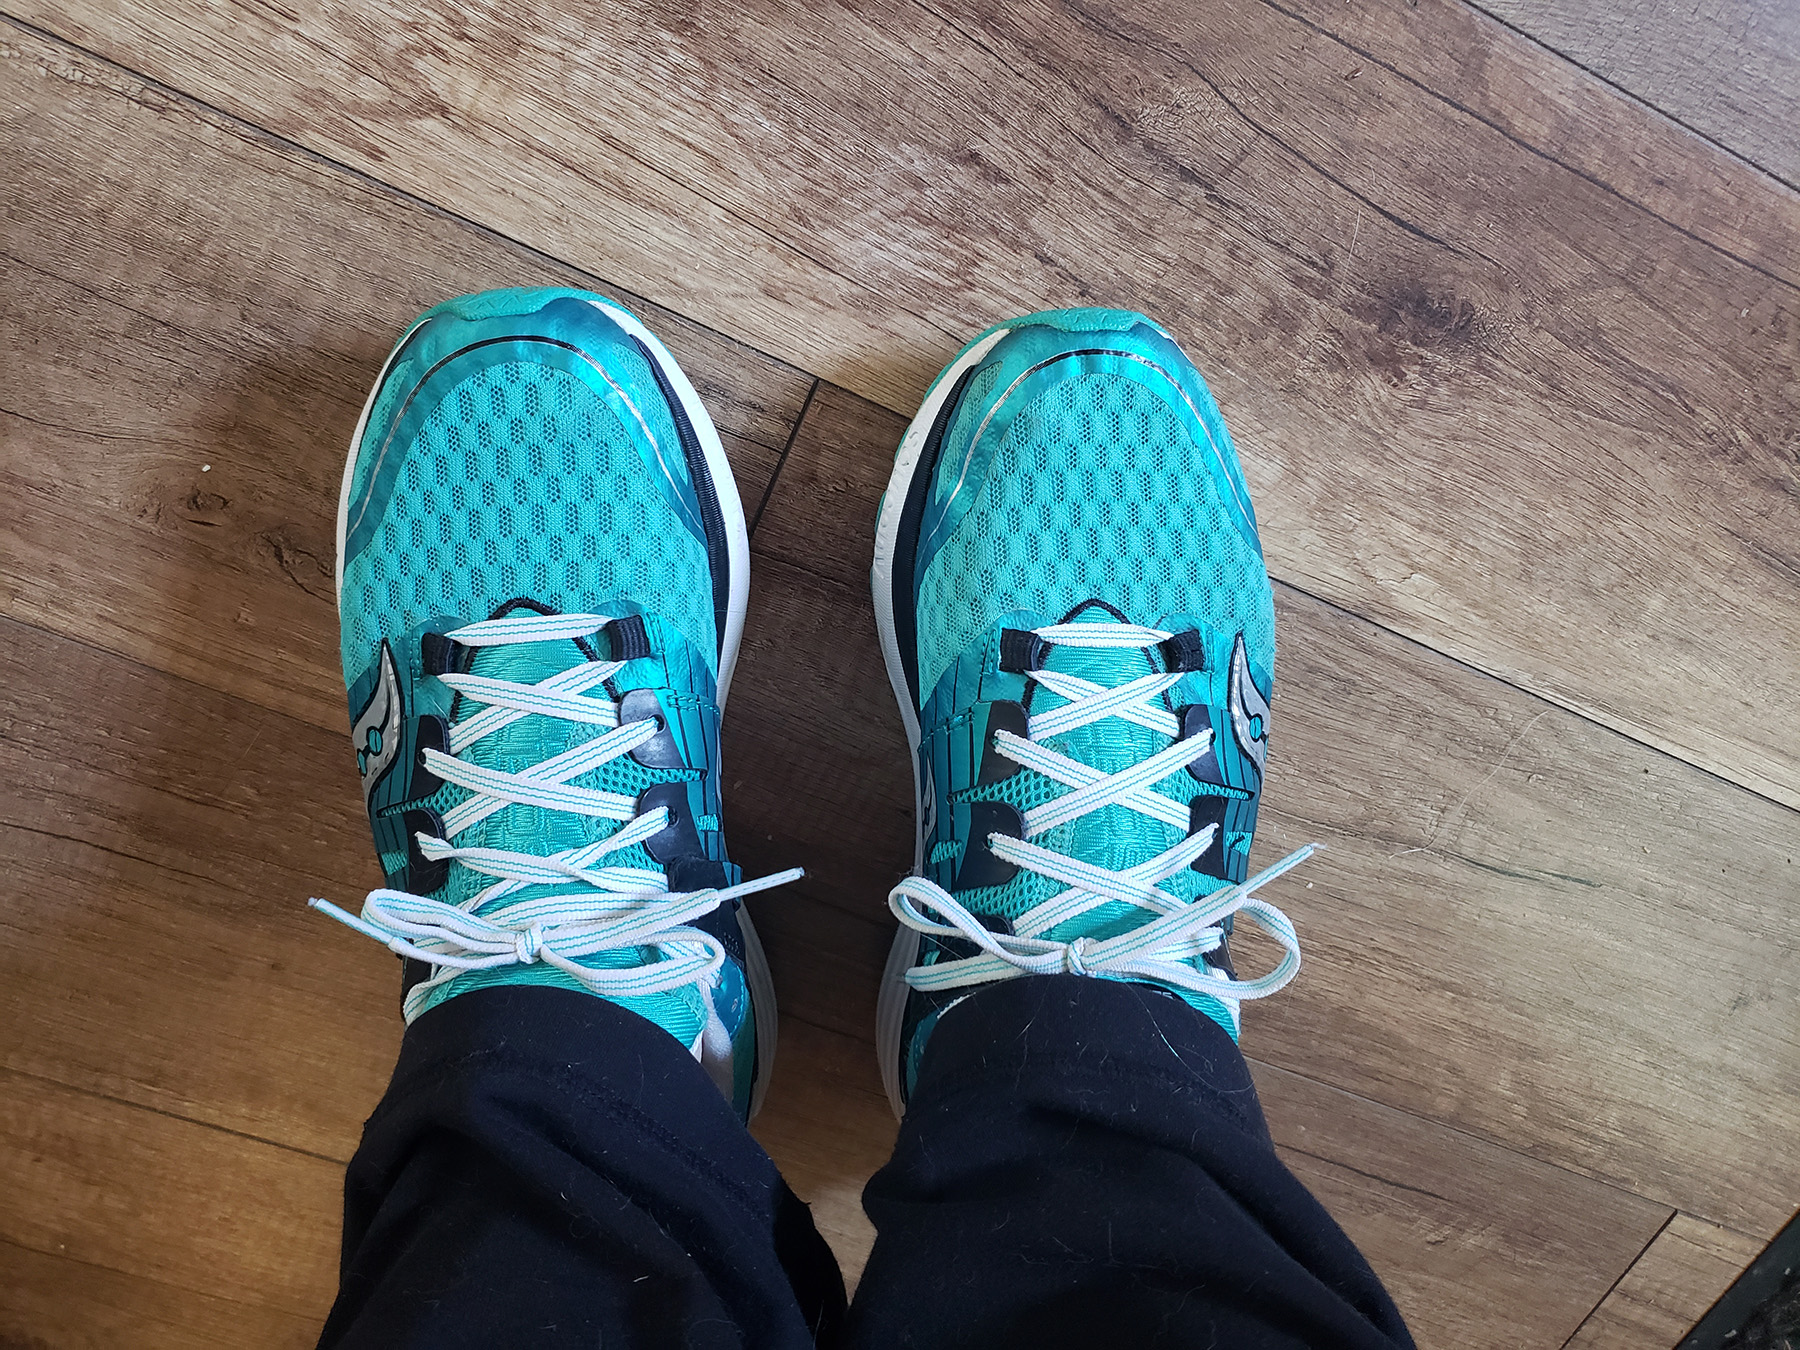 A pair of feet with green running shoes on.